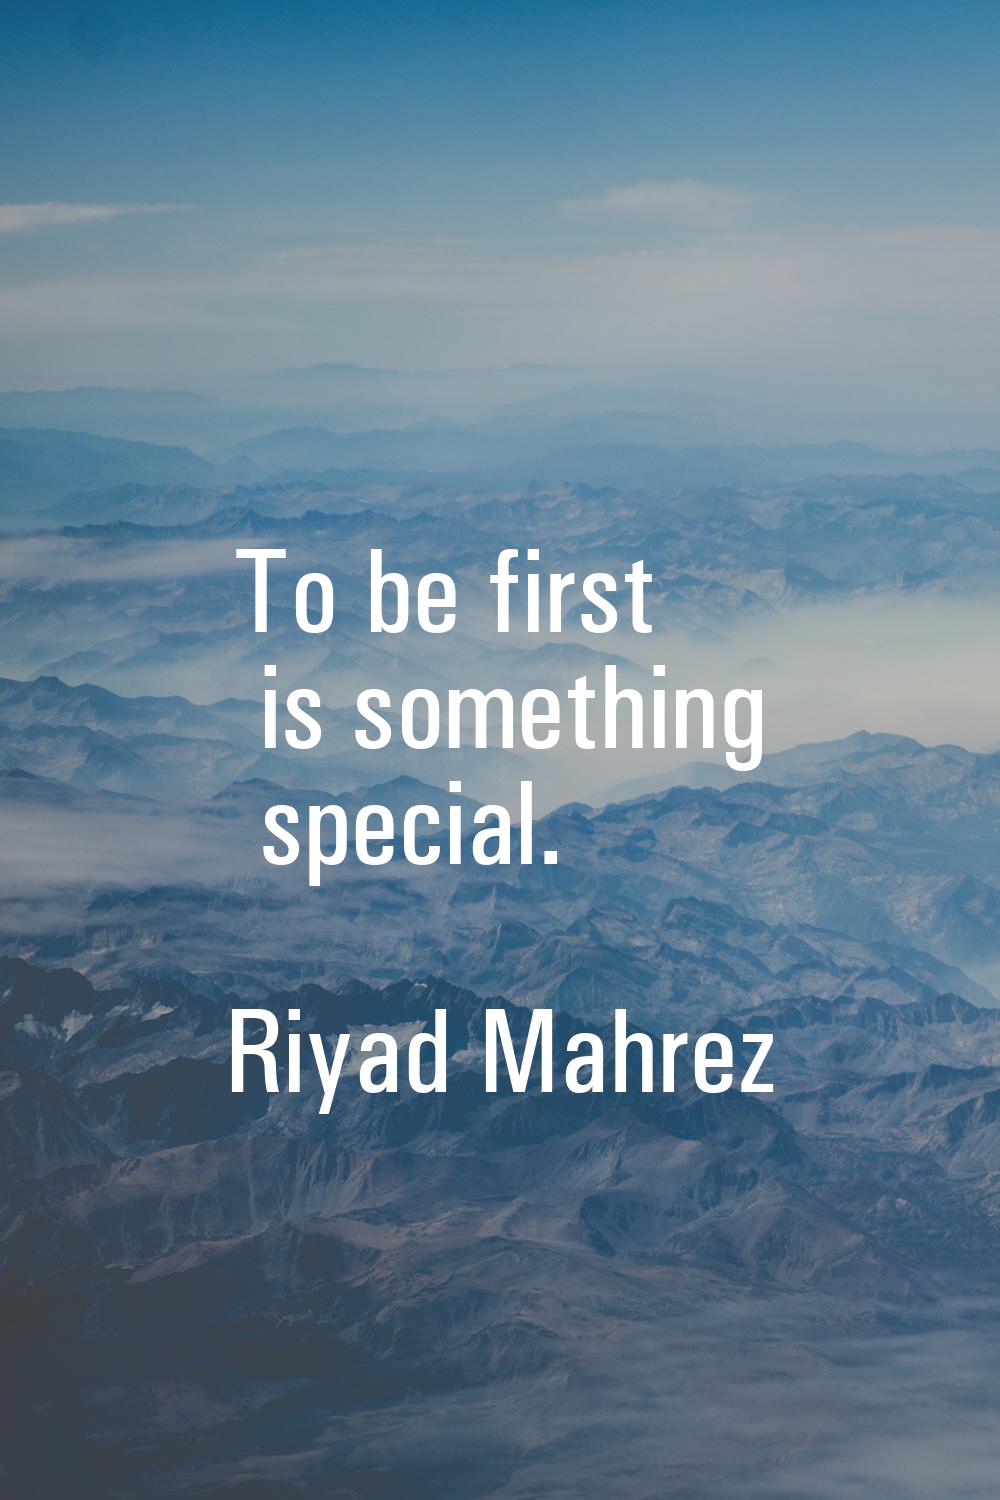 To be first is something special.